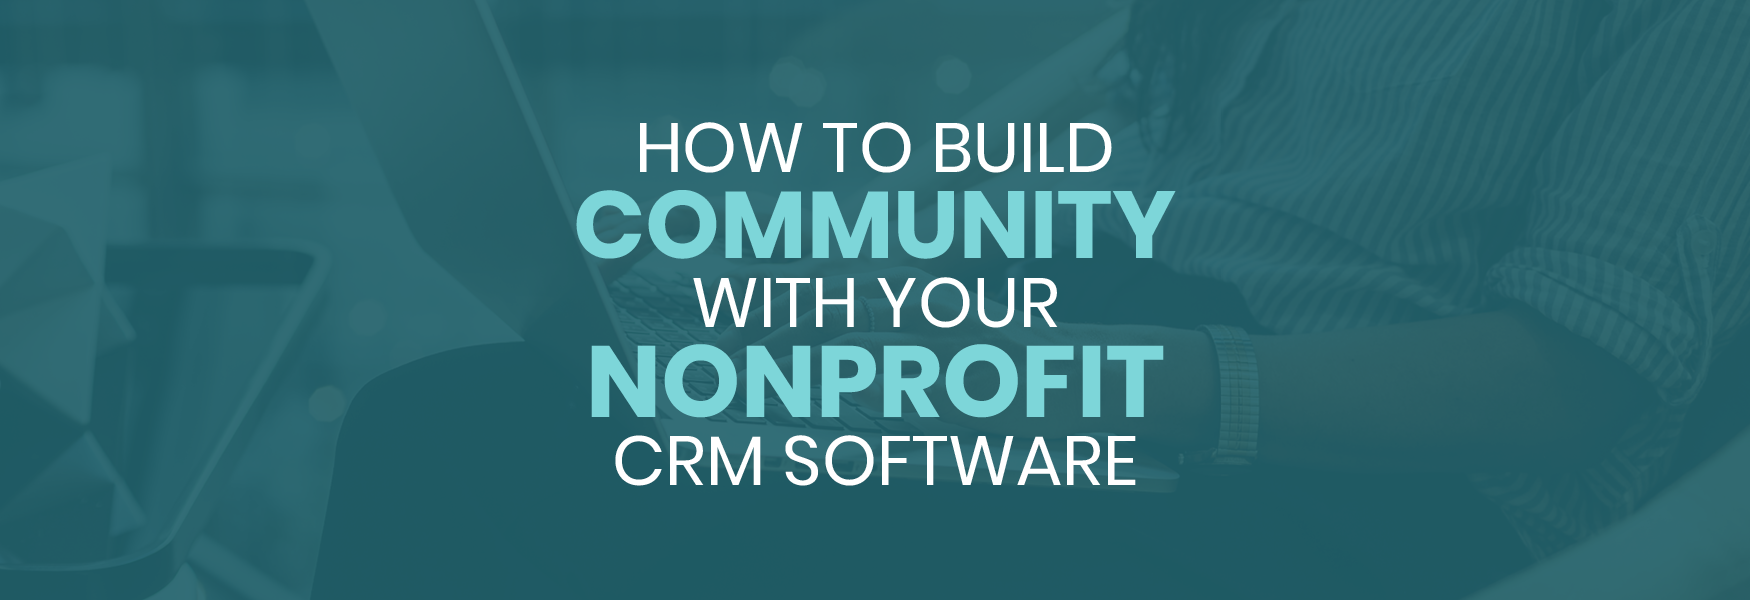 This guide explores how organizations can build community using their nonprofit CRM.